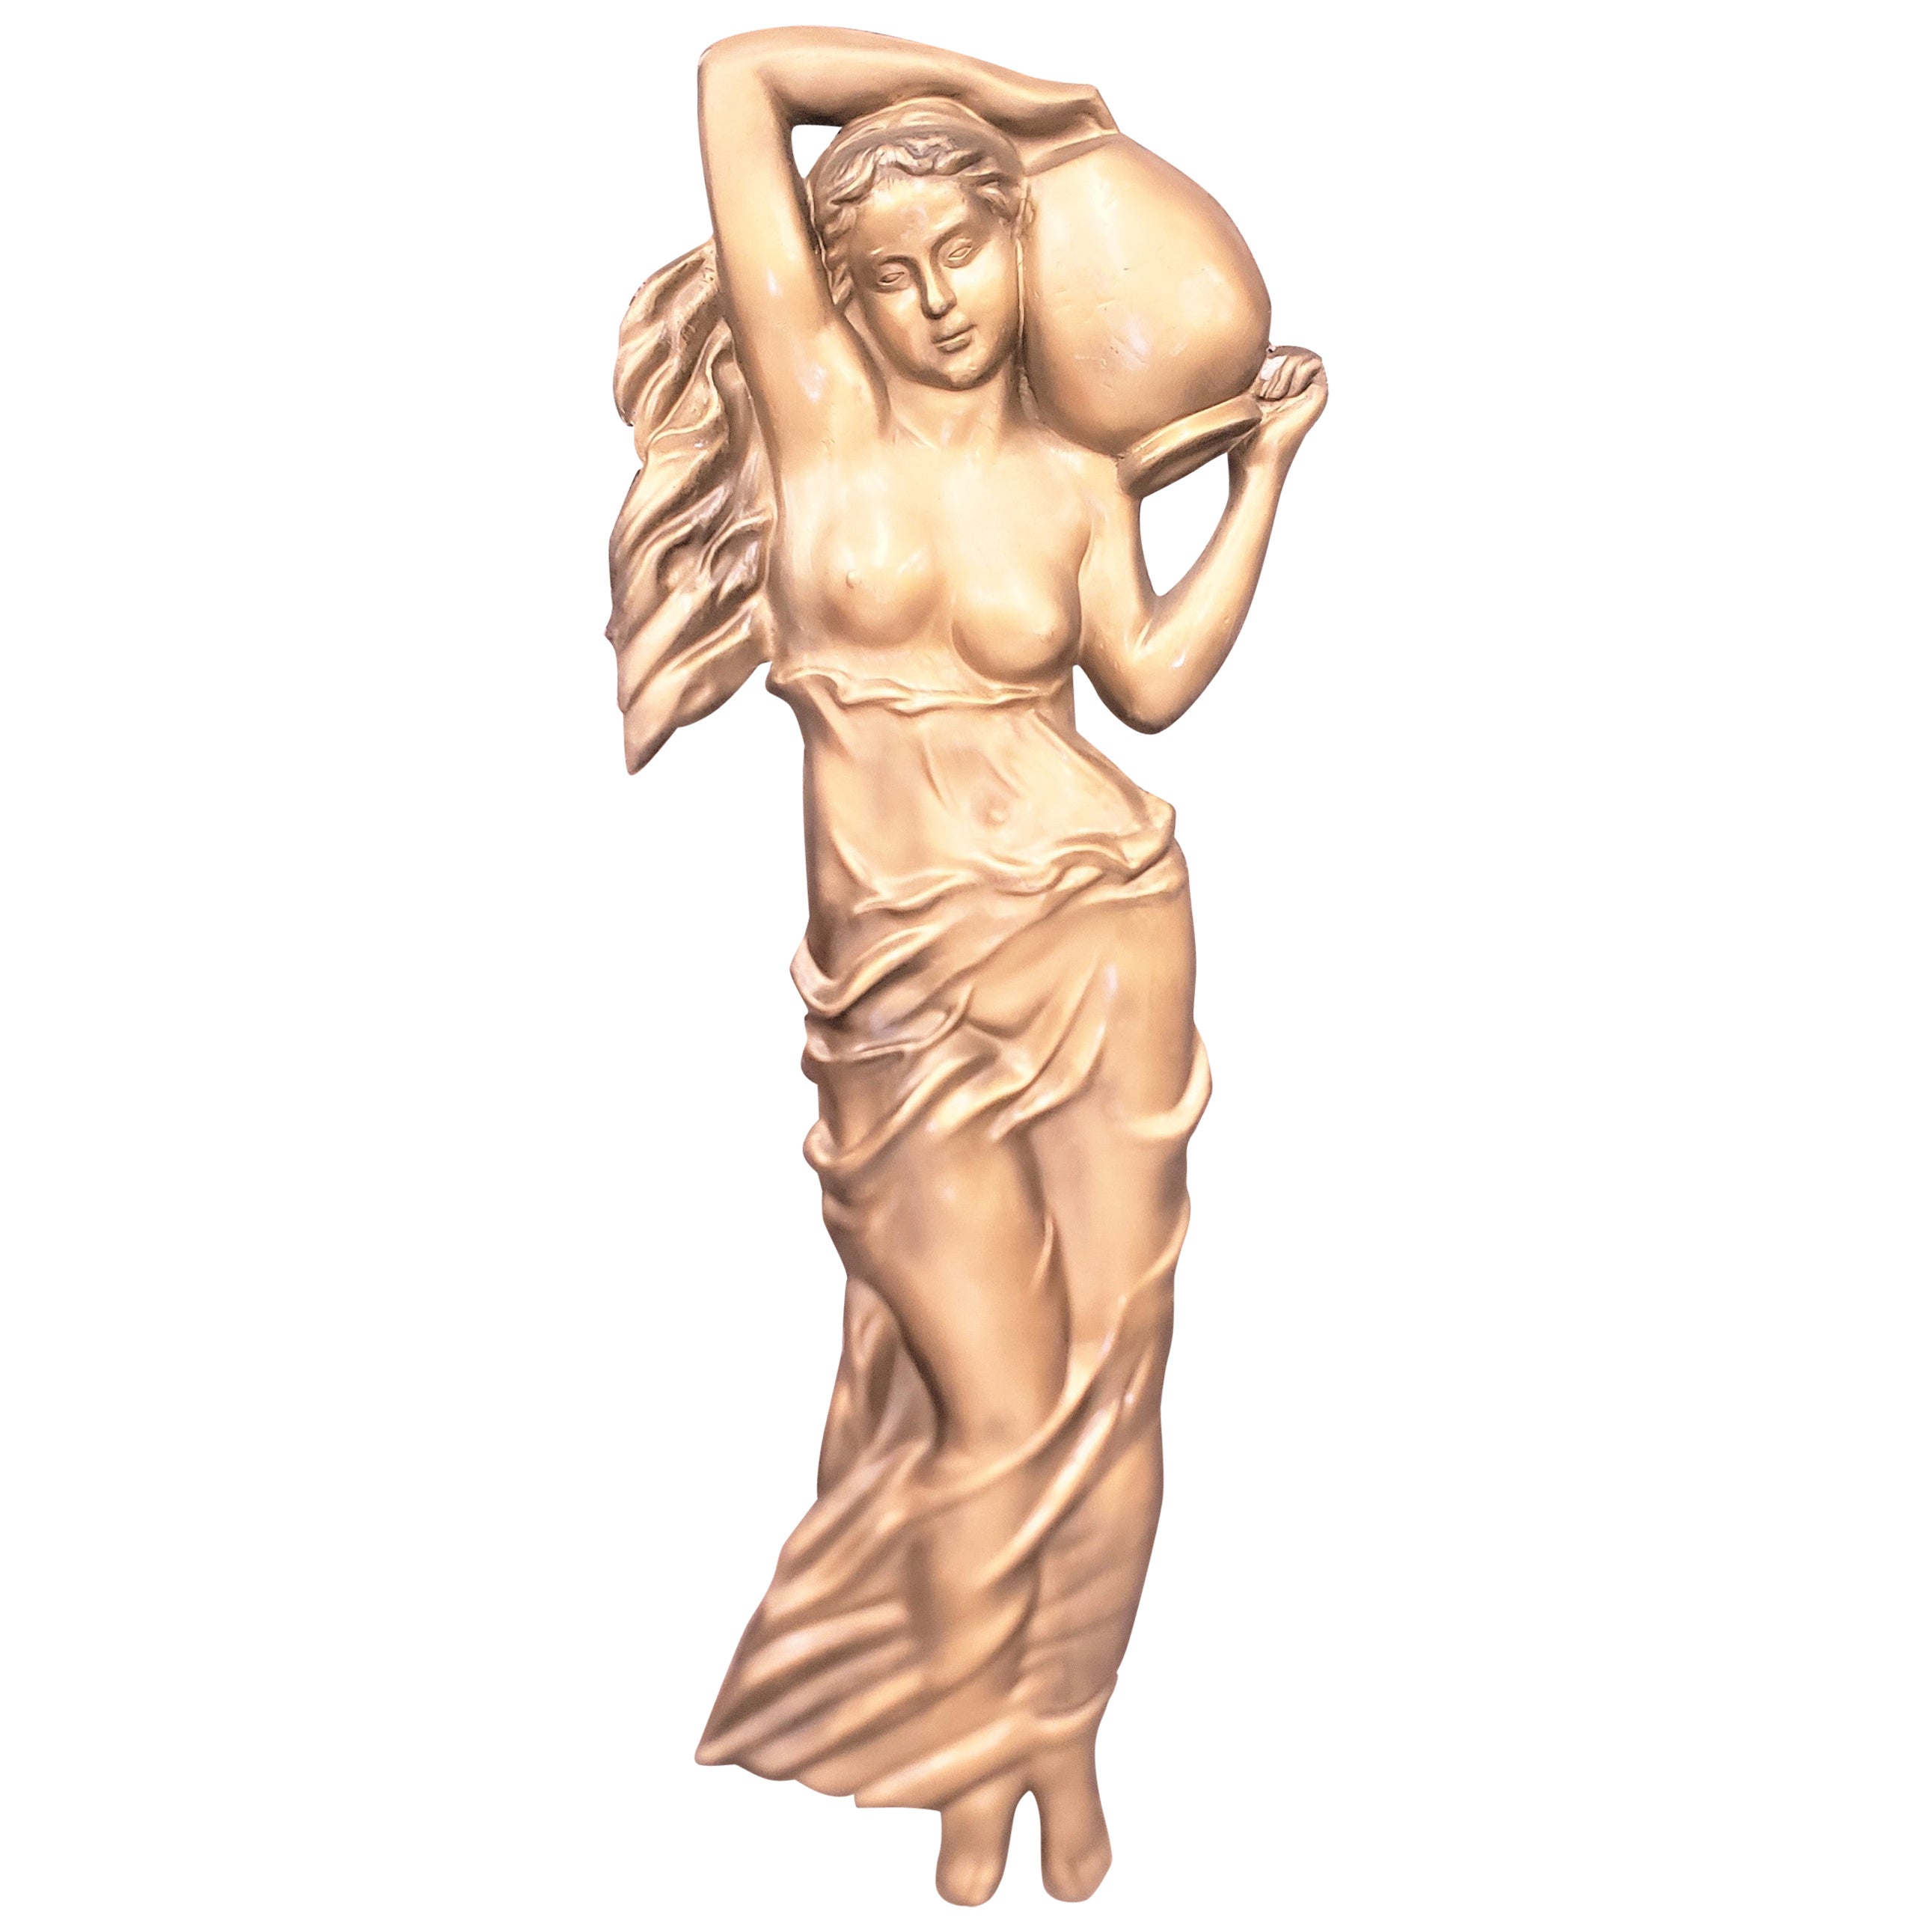 Large Vintage Molded Semi-Nude Neoclassical Styled Female Relief Wall Sculpture